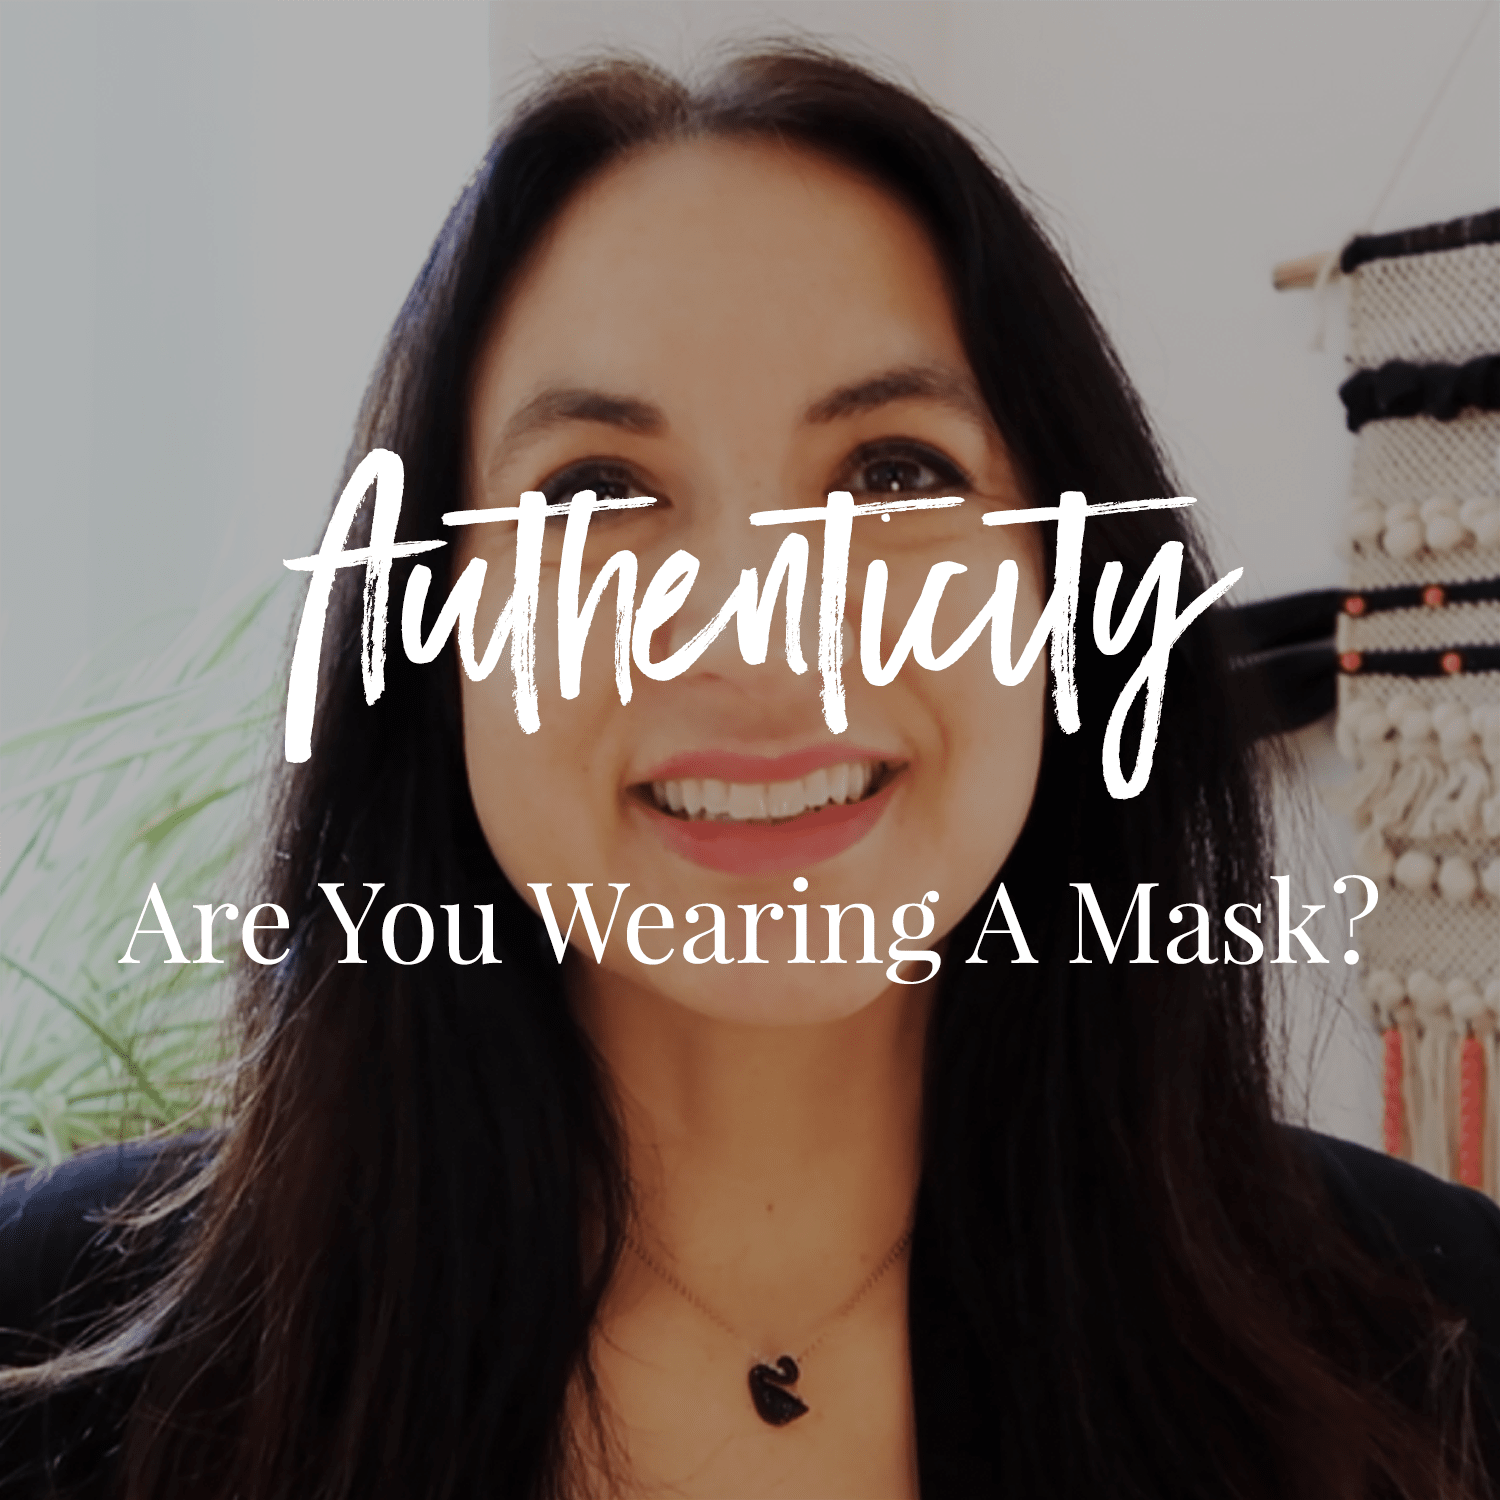 Video | Authenticity: What Is Masking?